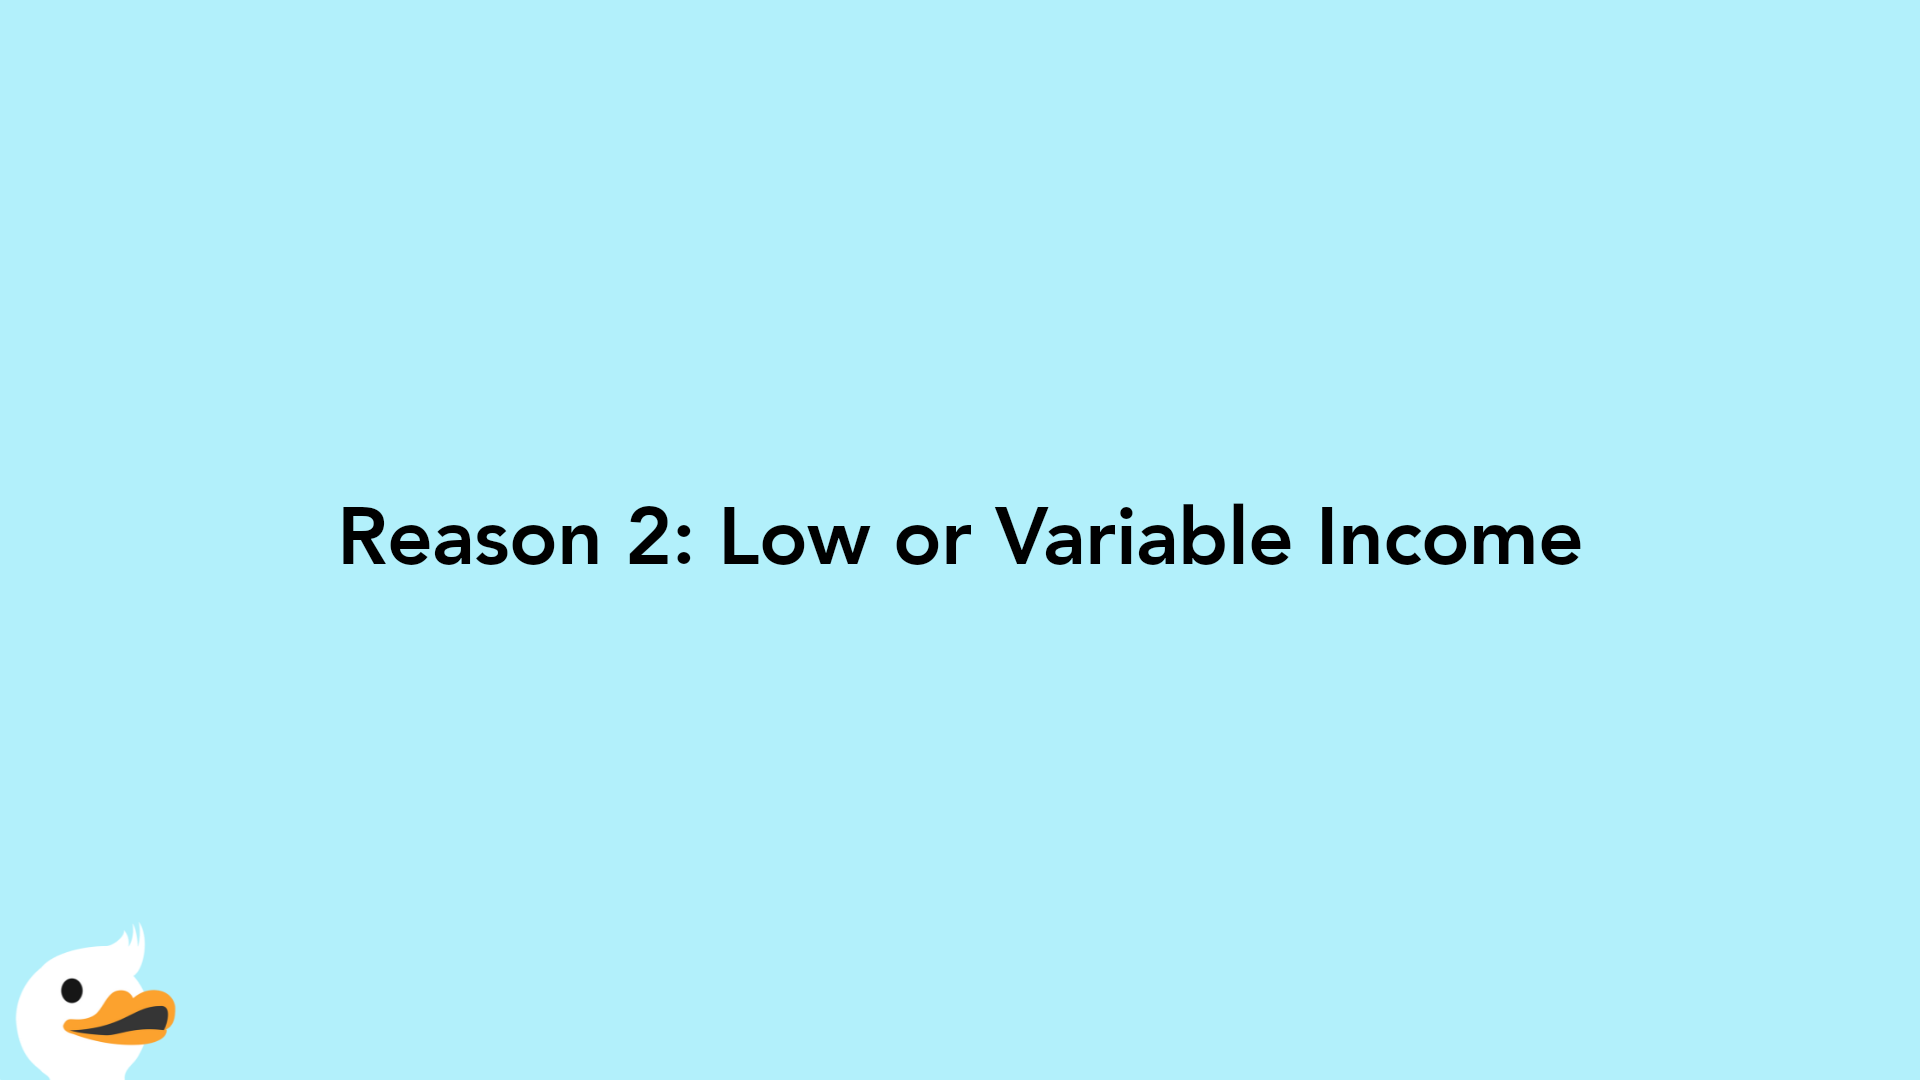 Reason 2: Low or Variable Income